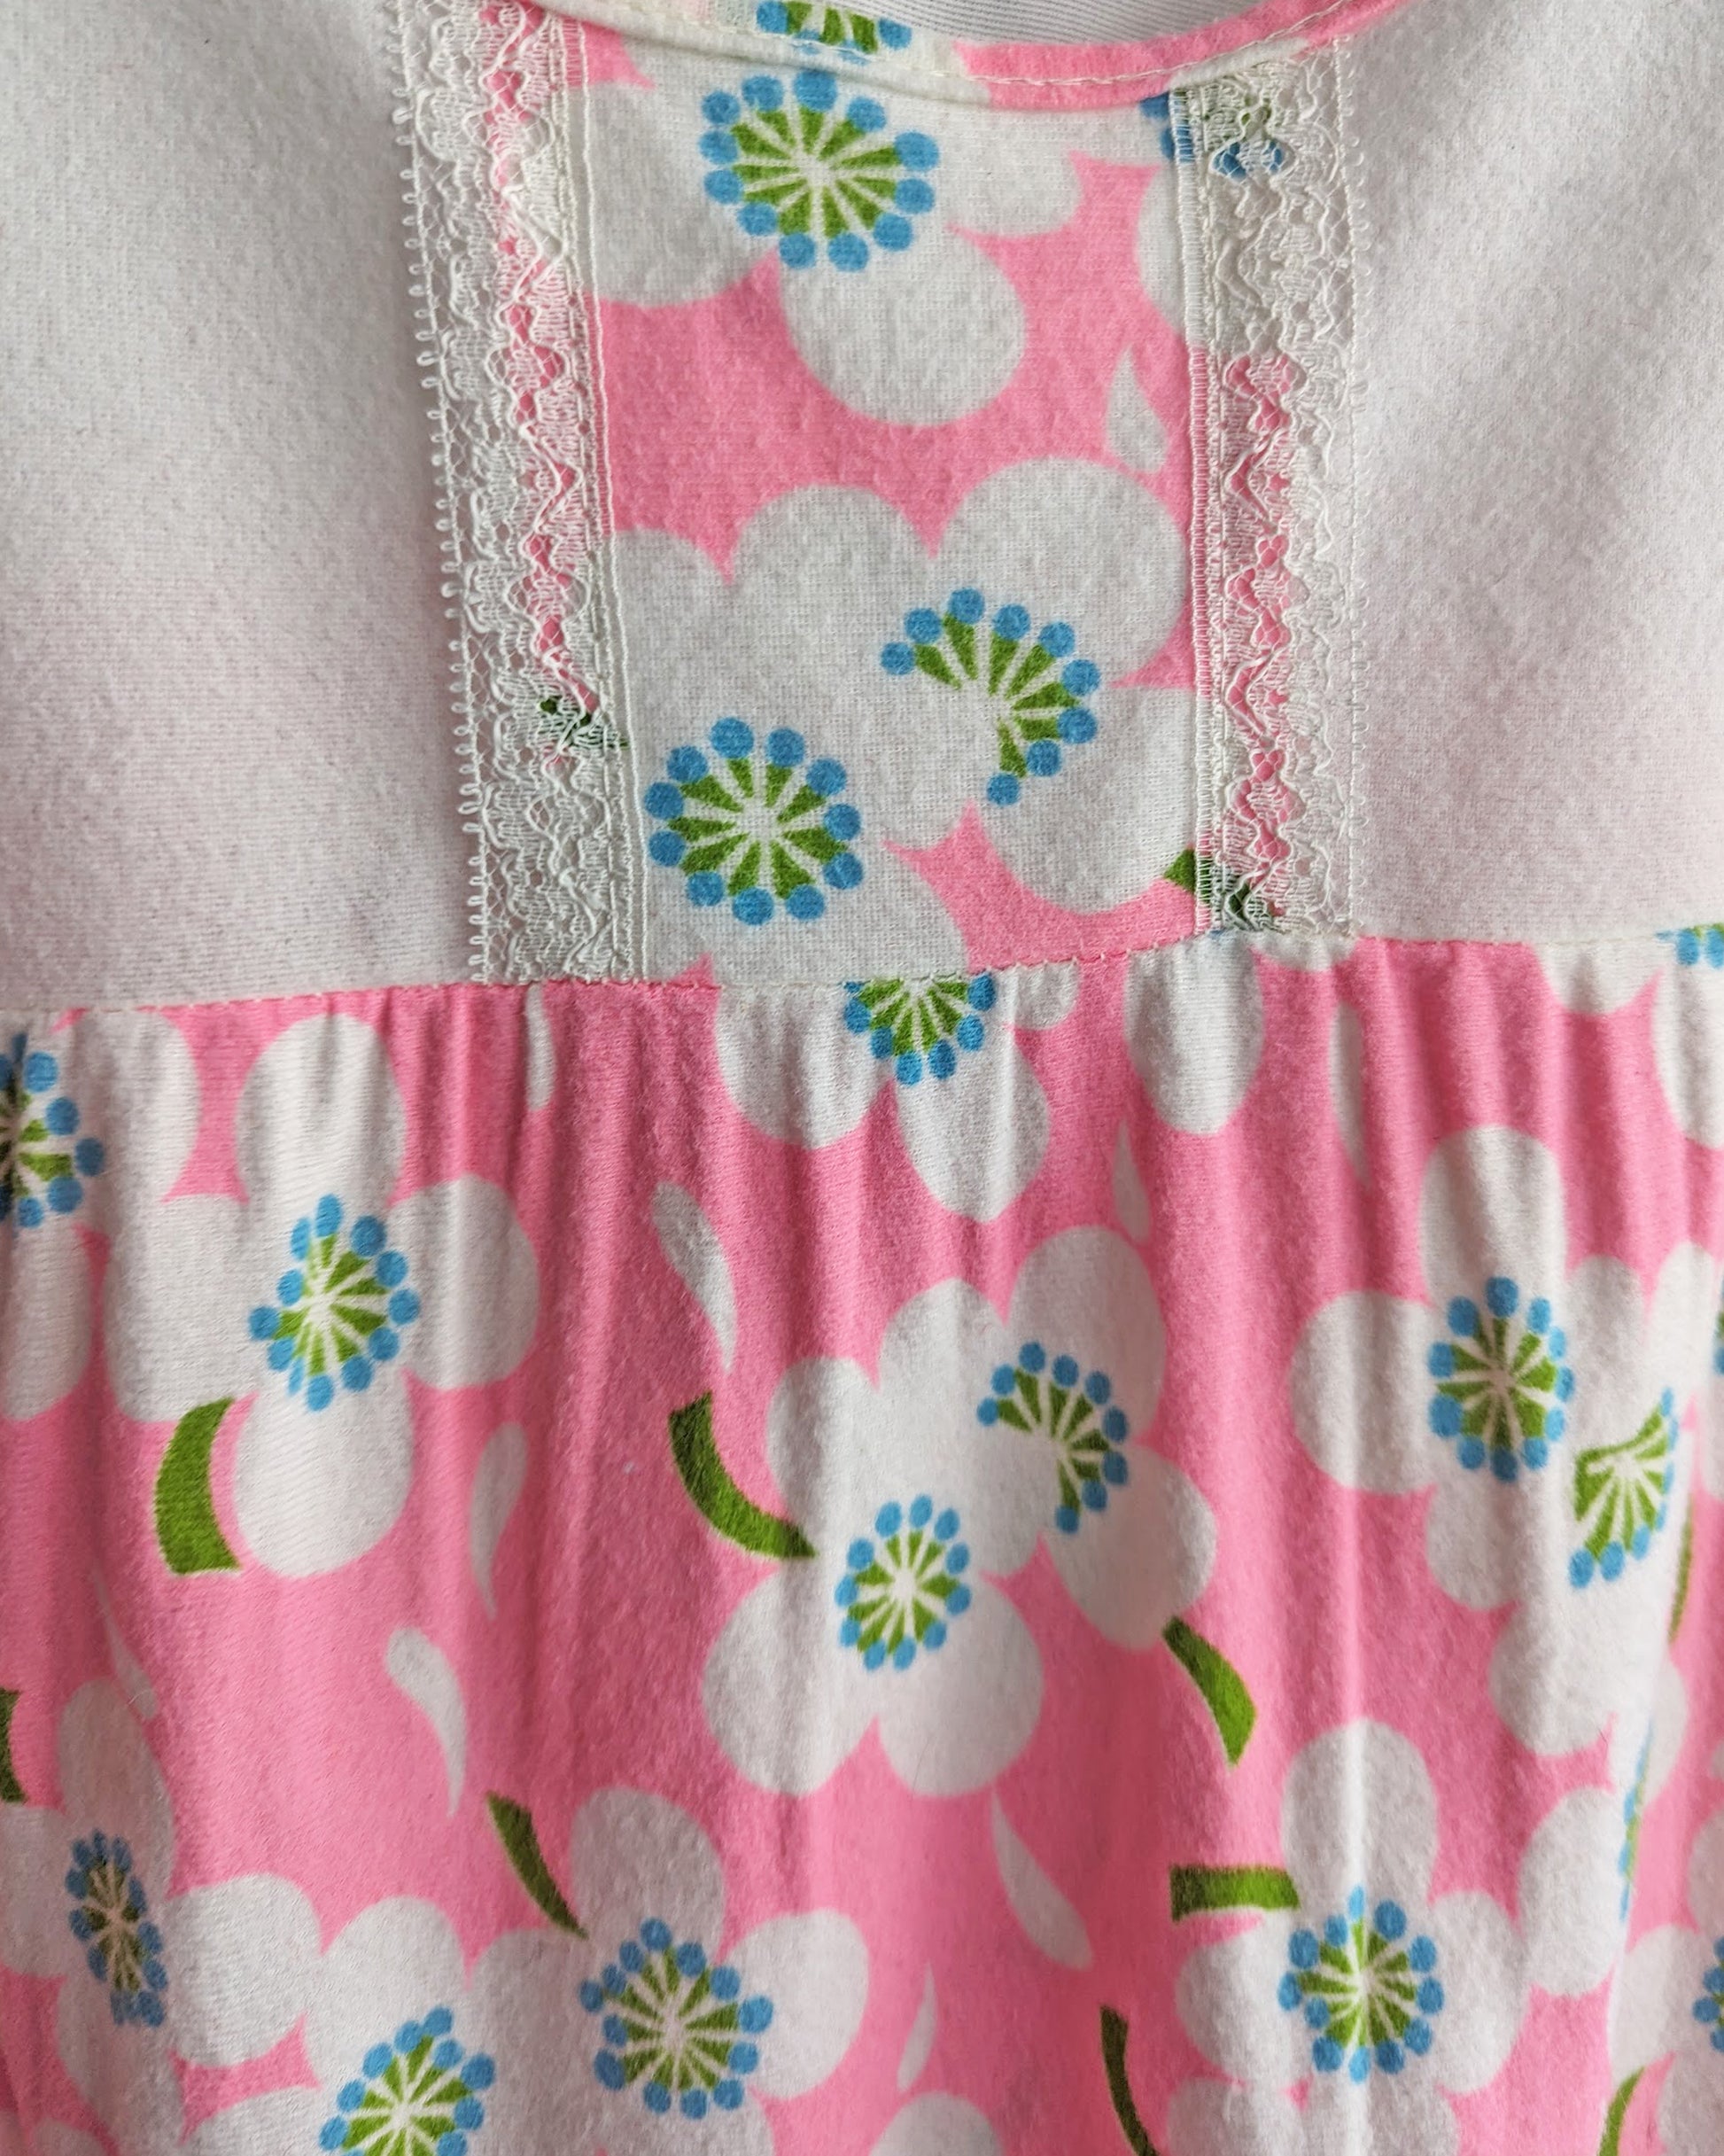 close up of the nightgown which shows the floral print